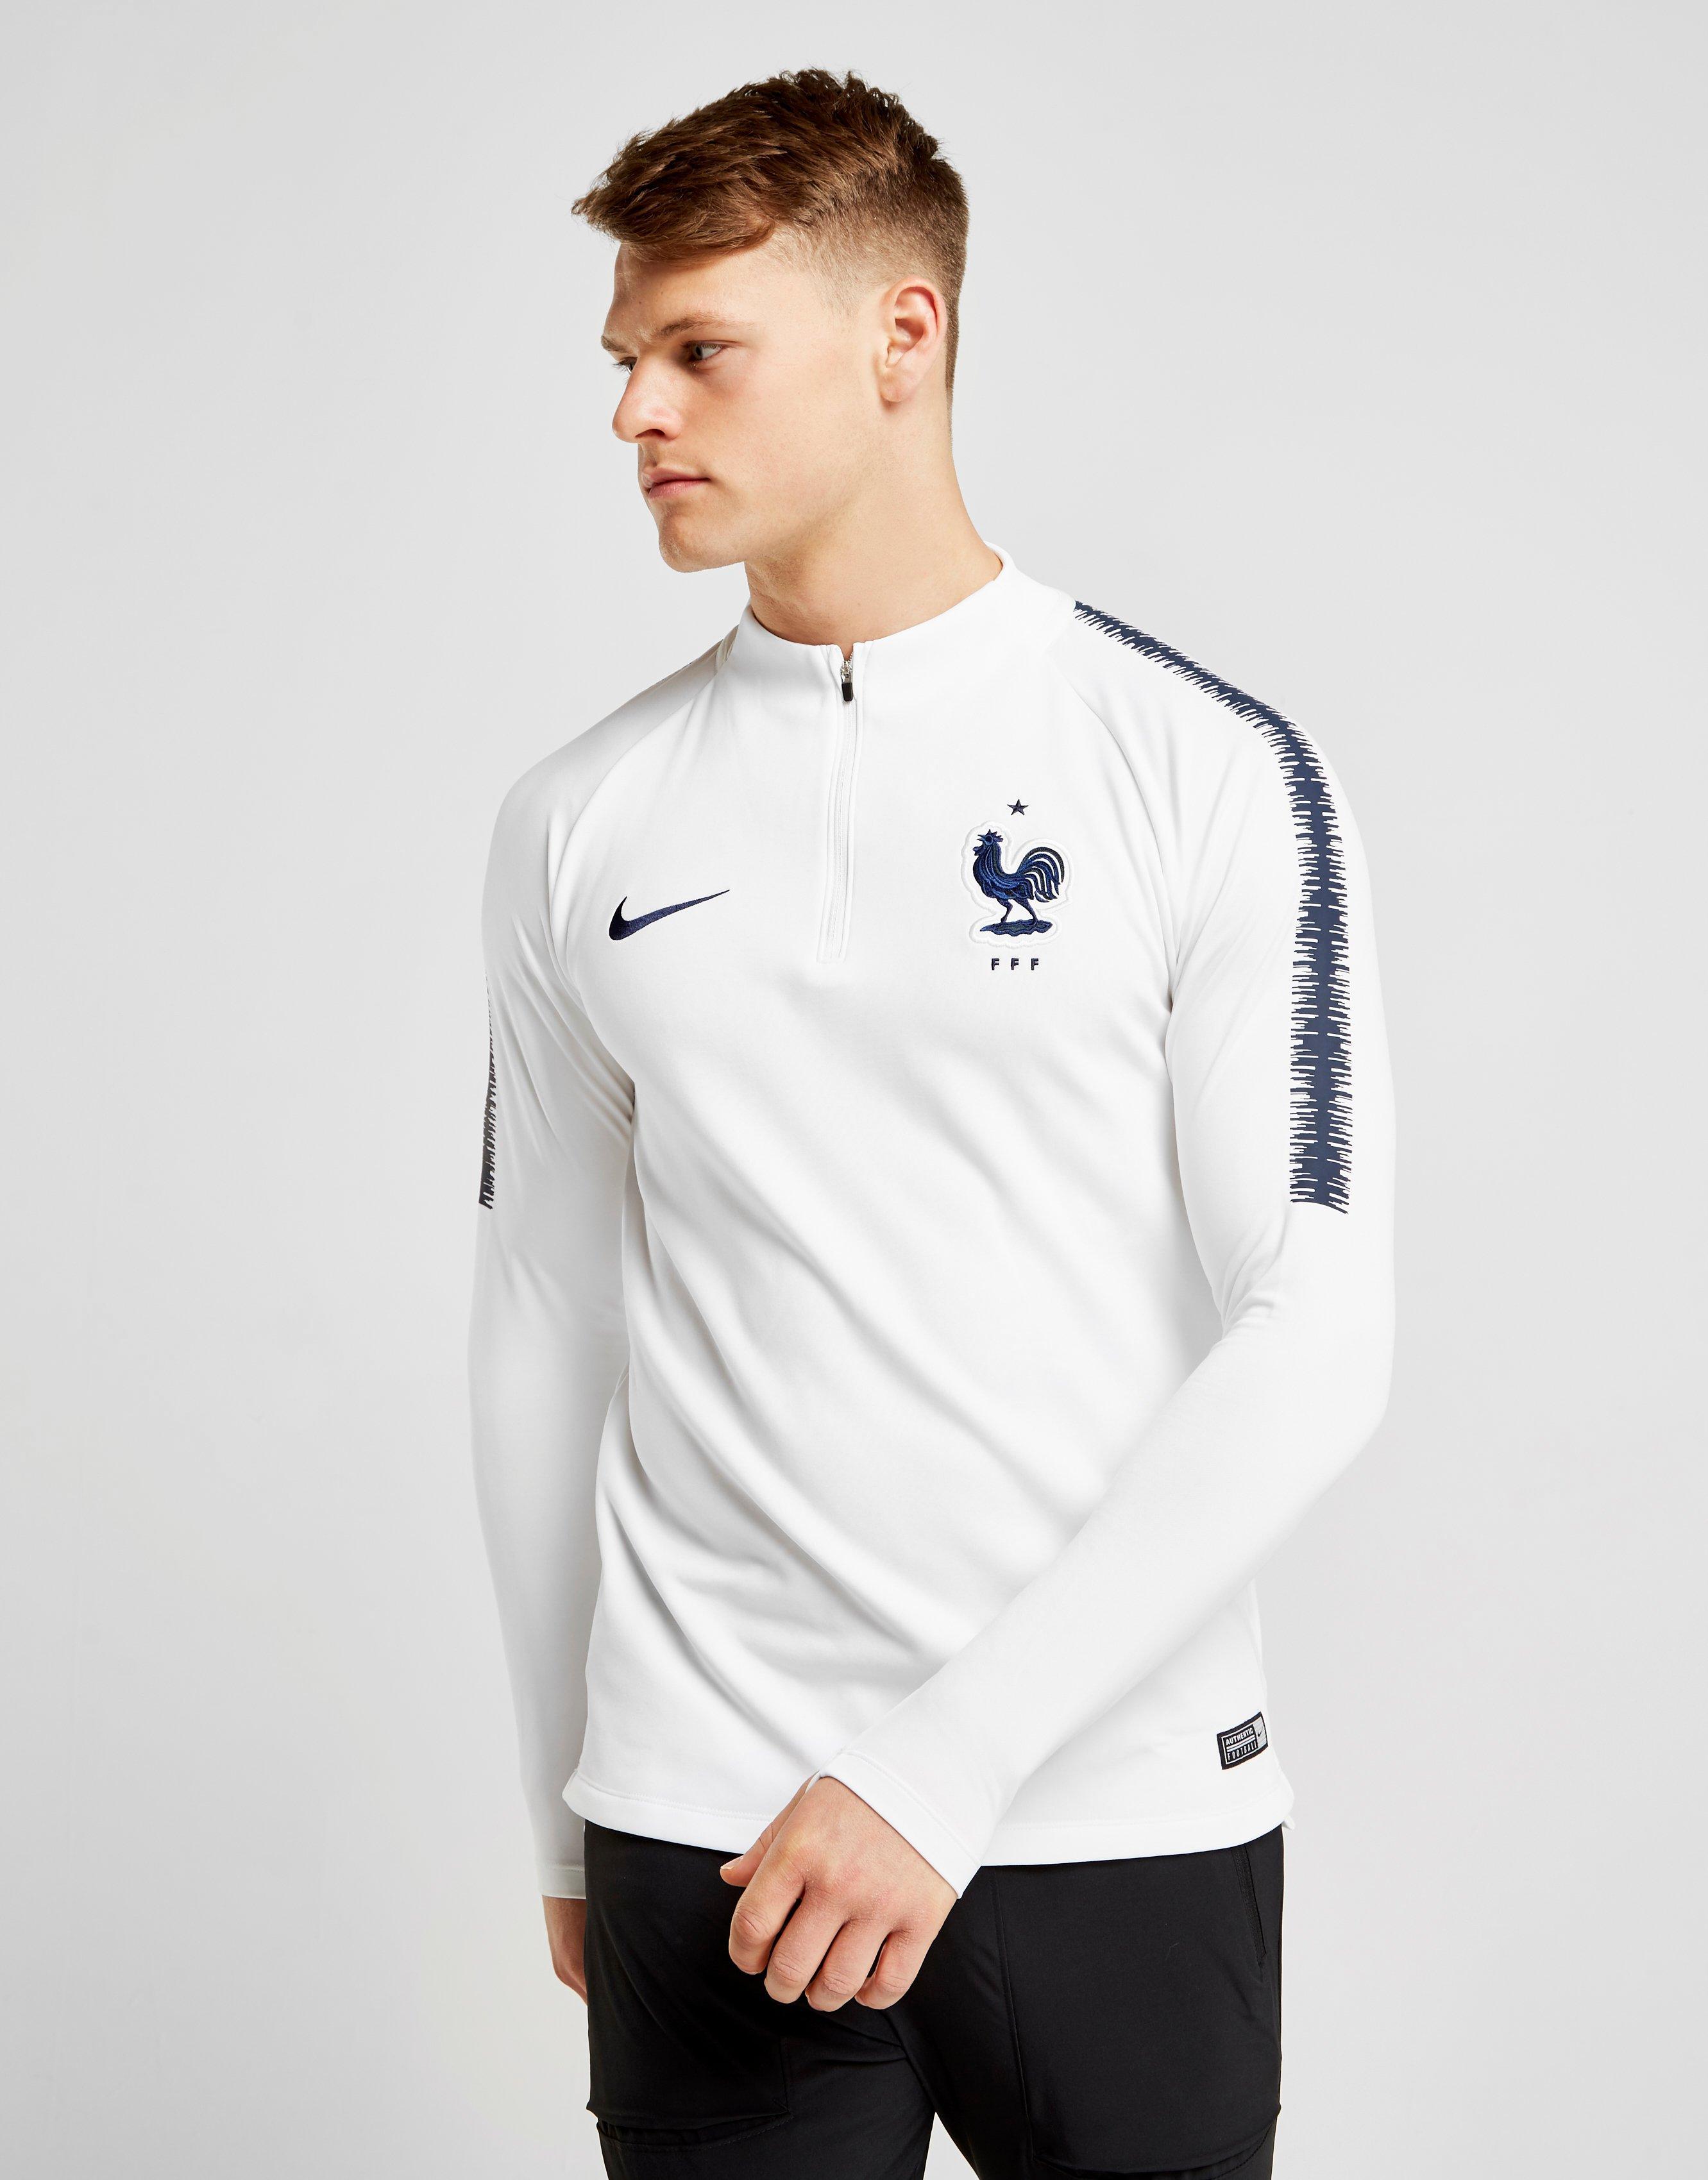 Nike Synthetic France Squad Drill Top in White/Blue (White) for Men - Lyst